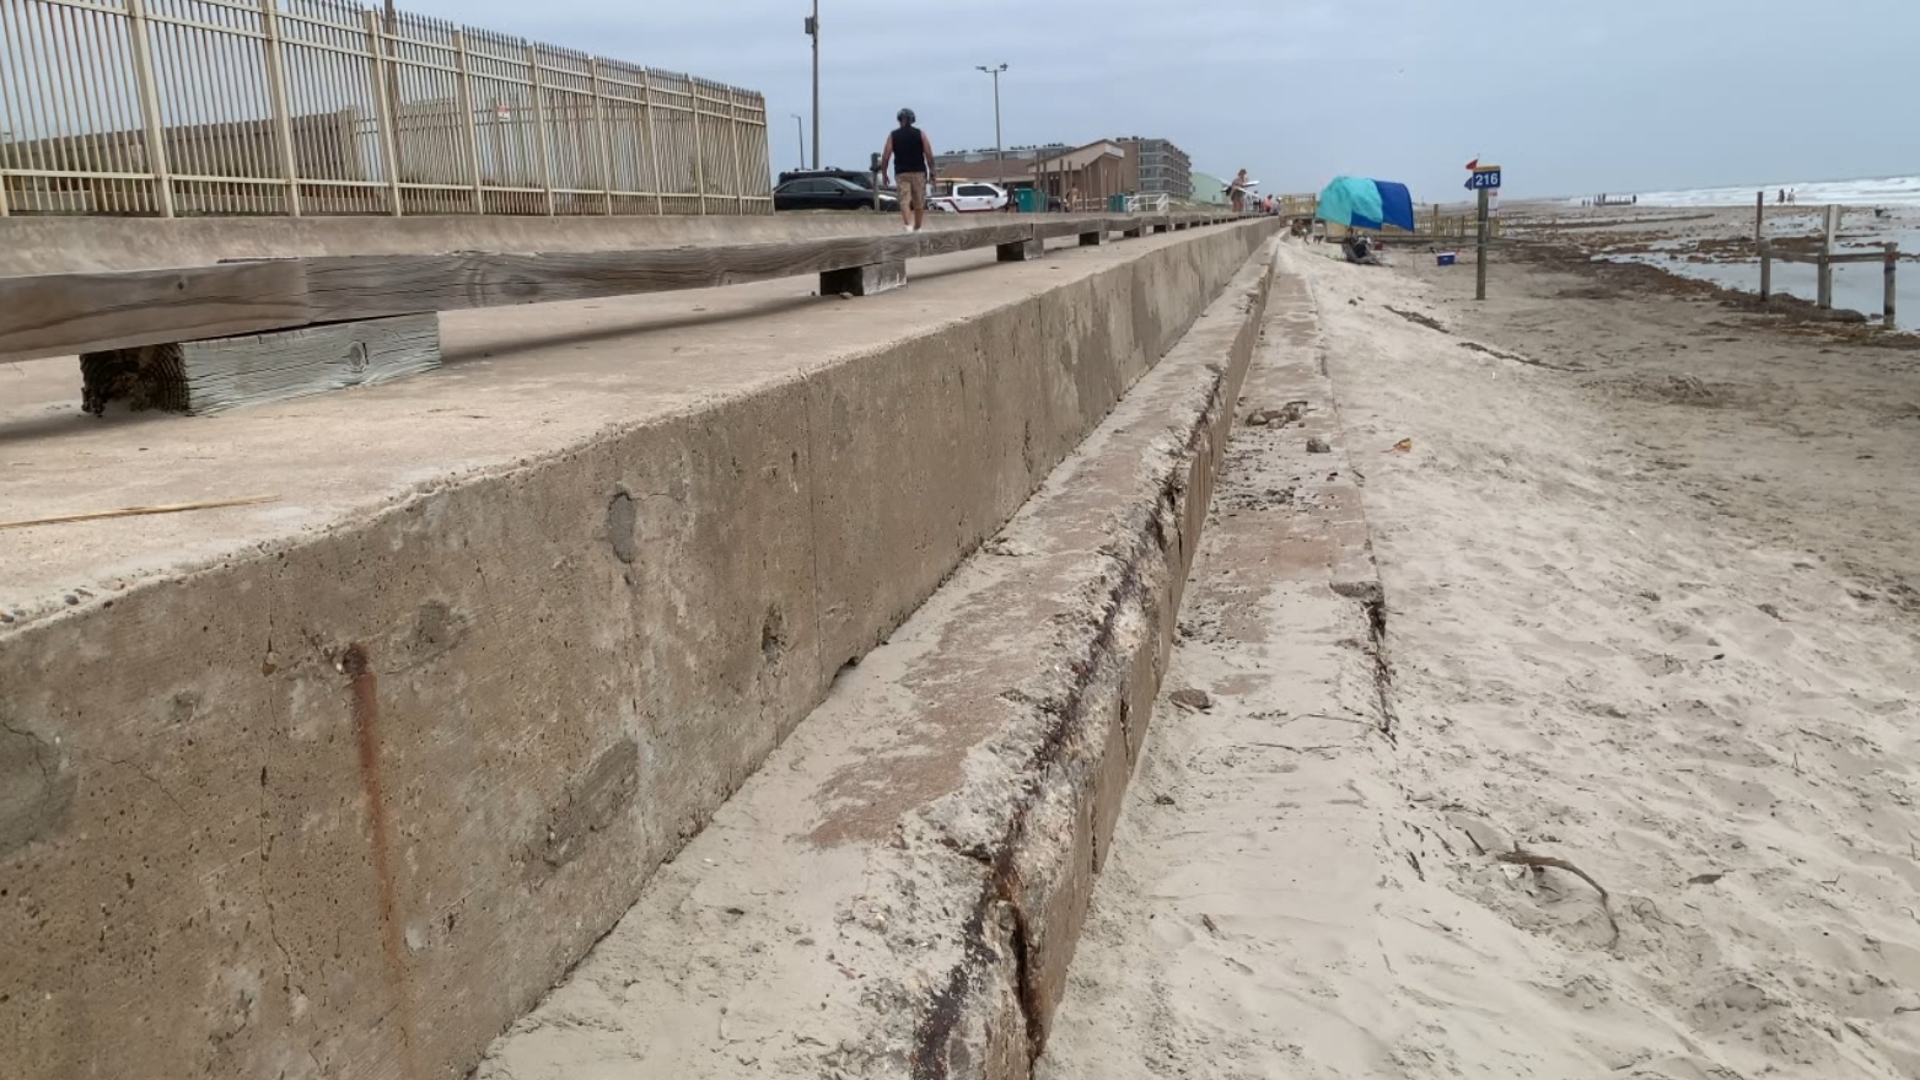 The seawall on the island is in need of millions of dollars' worth of renovation work and the city has the money to start if the owners agree to let them.